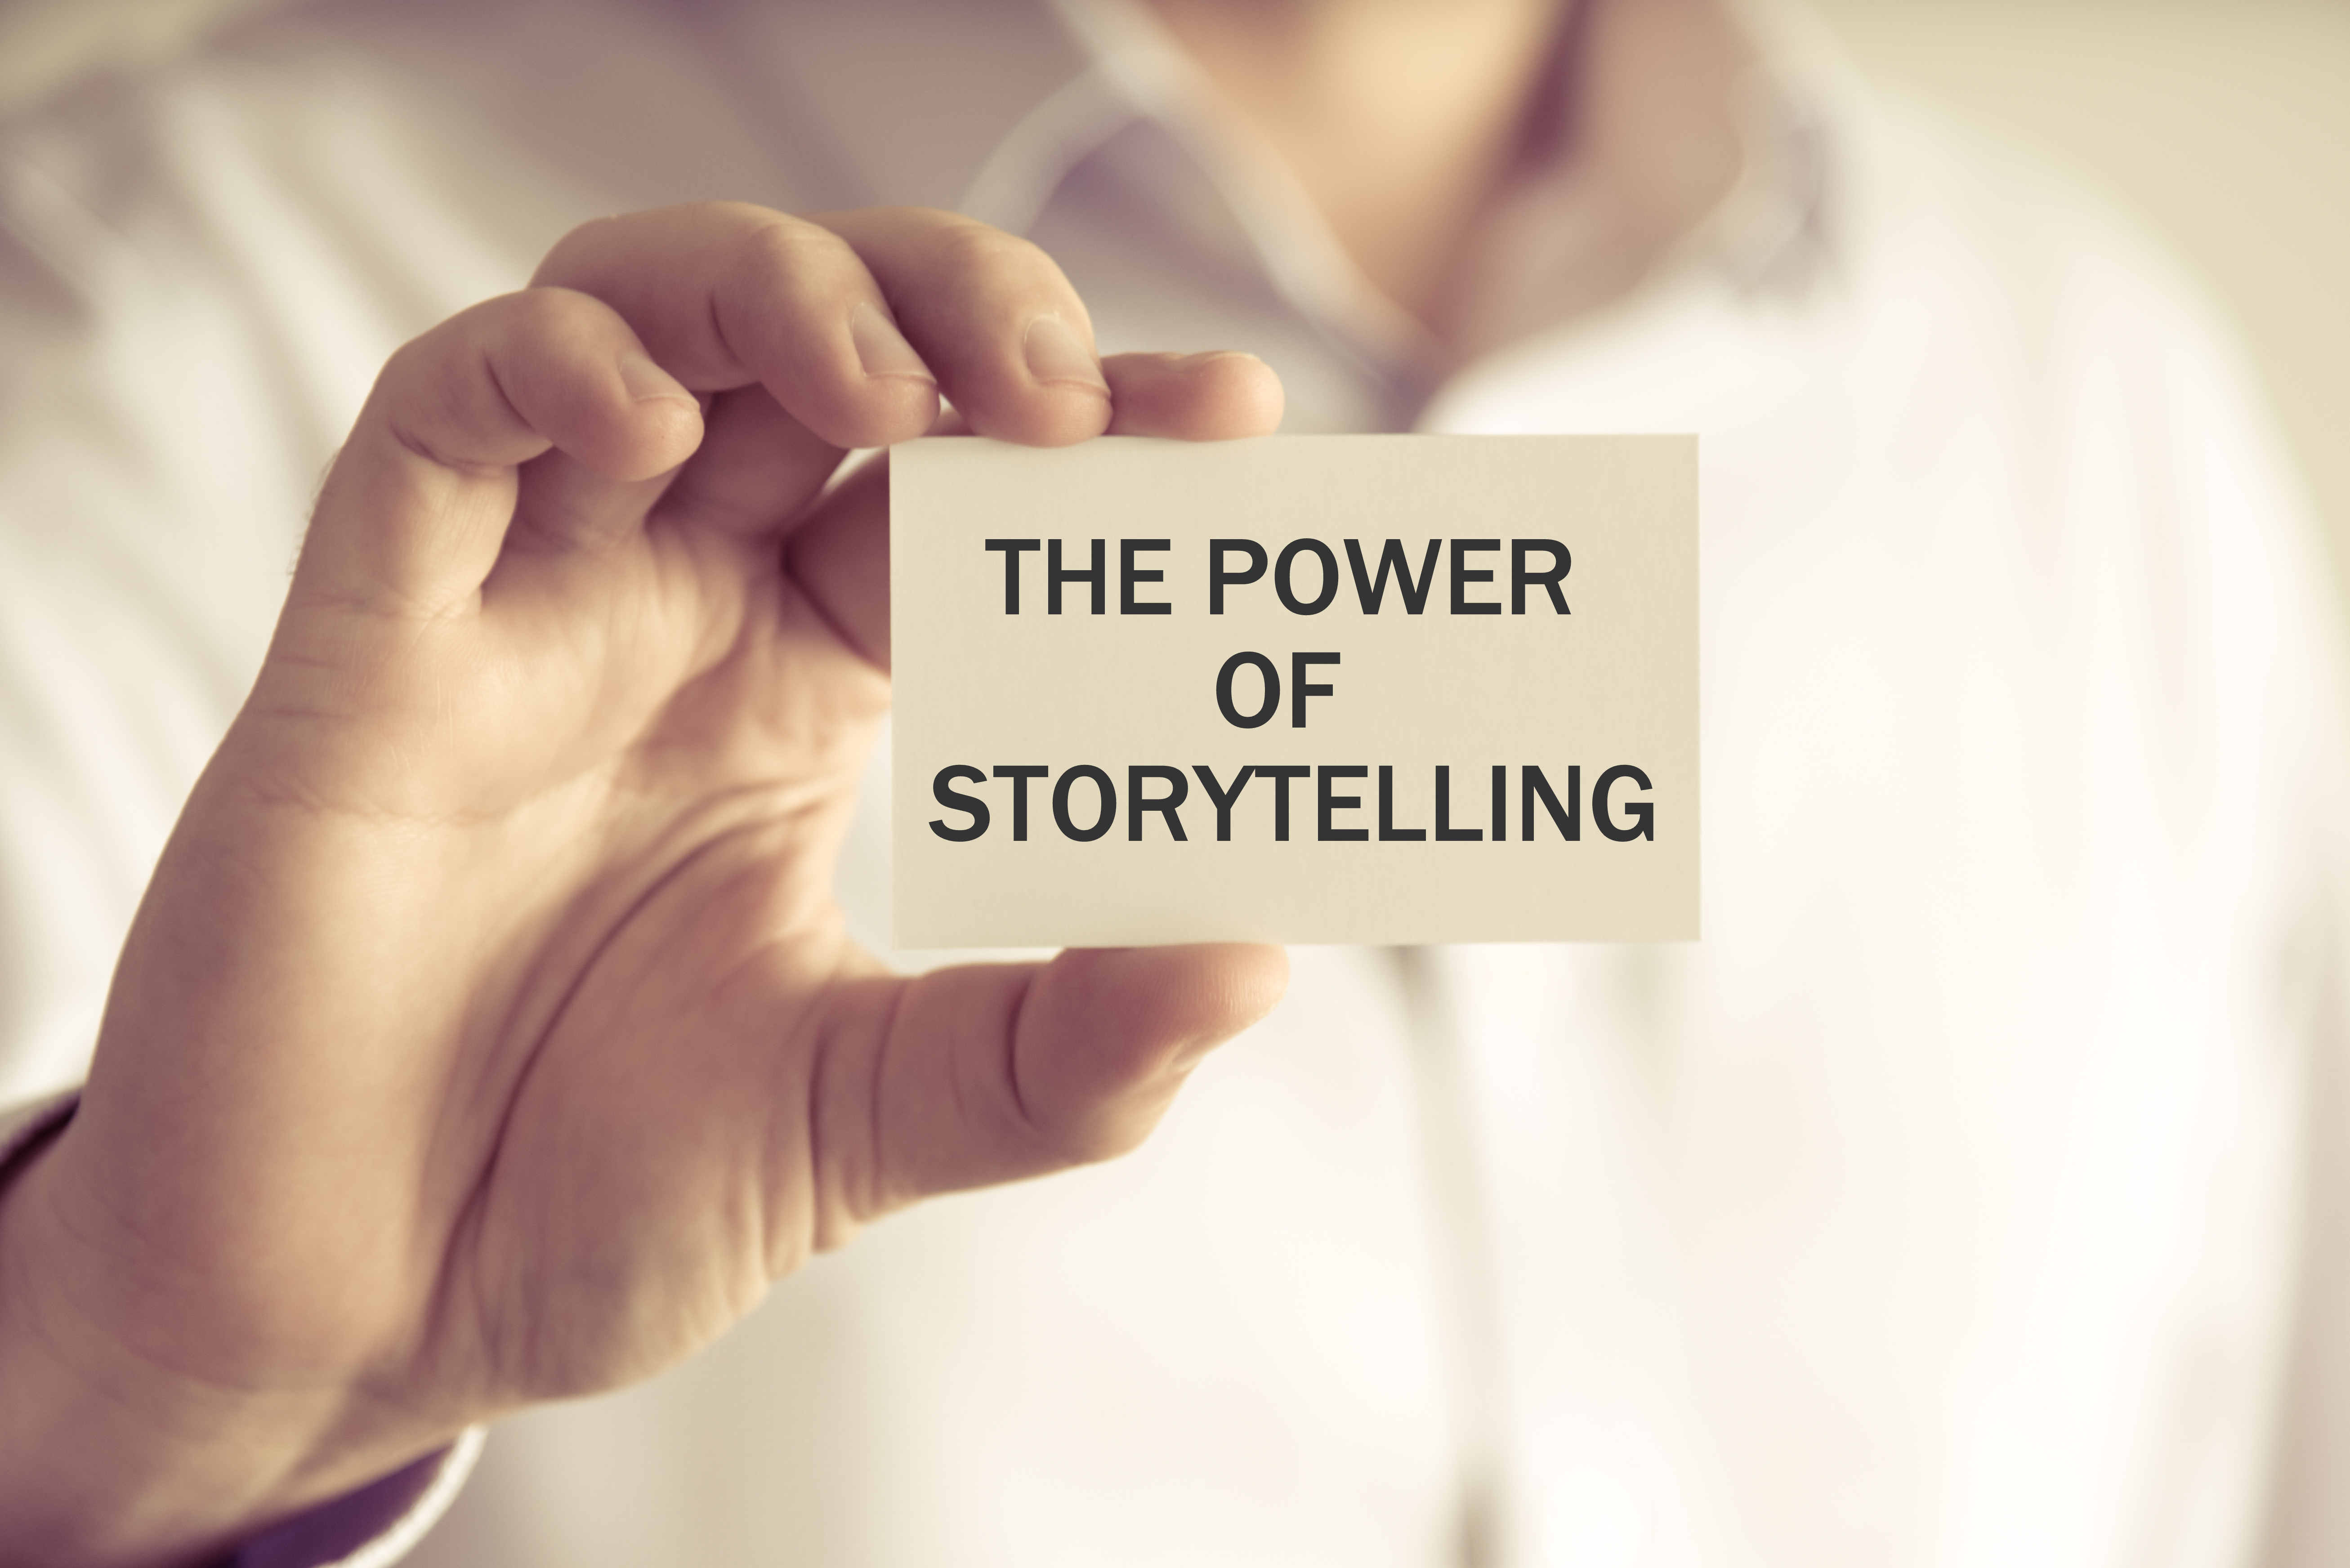 Importance of storytelling for state leaders